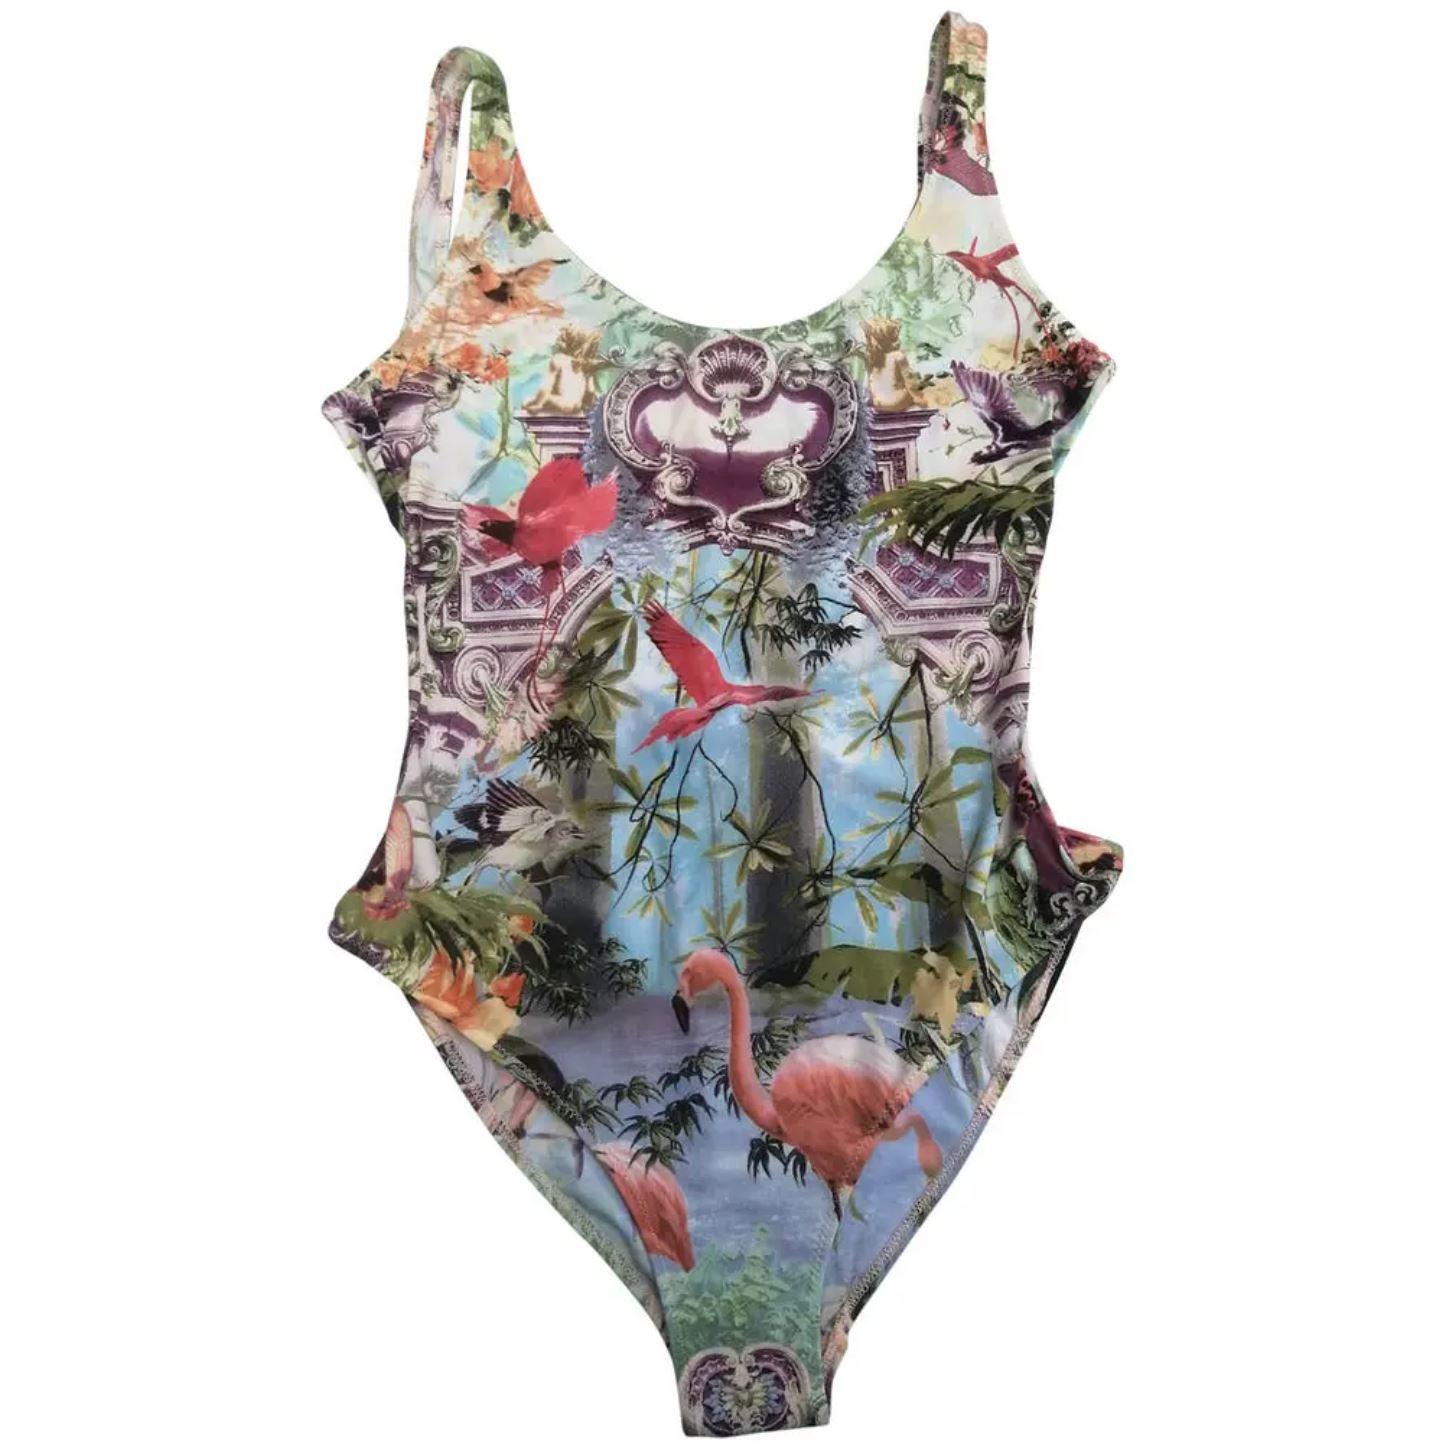 Wonderful tropical swimsuit by Jean Paul Gaultier!
Super vintage piece from the 90s!
Bella Hadid wears the same pattern, check the photos!

Flamingos, butterflies, Italian baroque motifs, angel sculptures, 